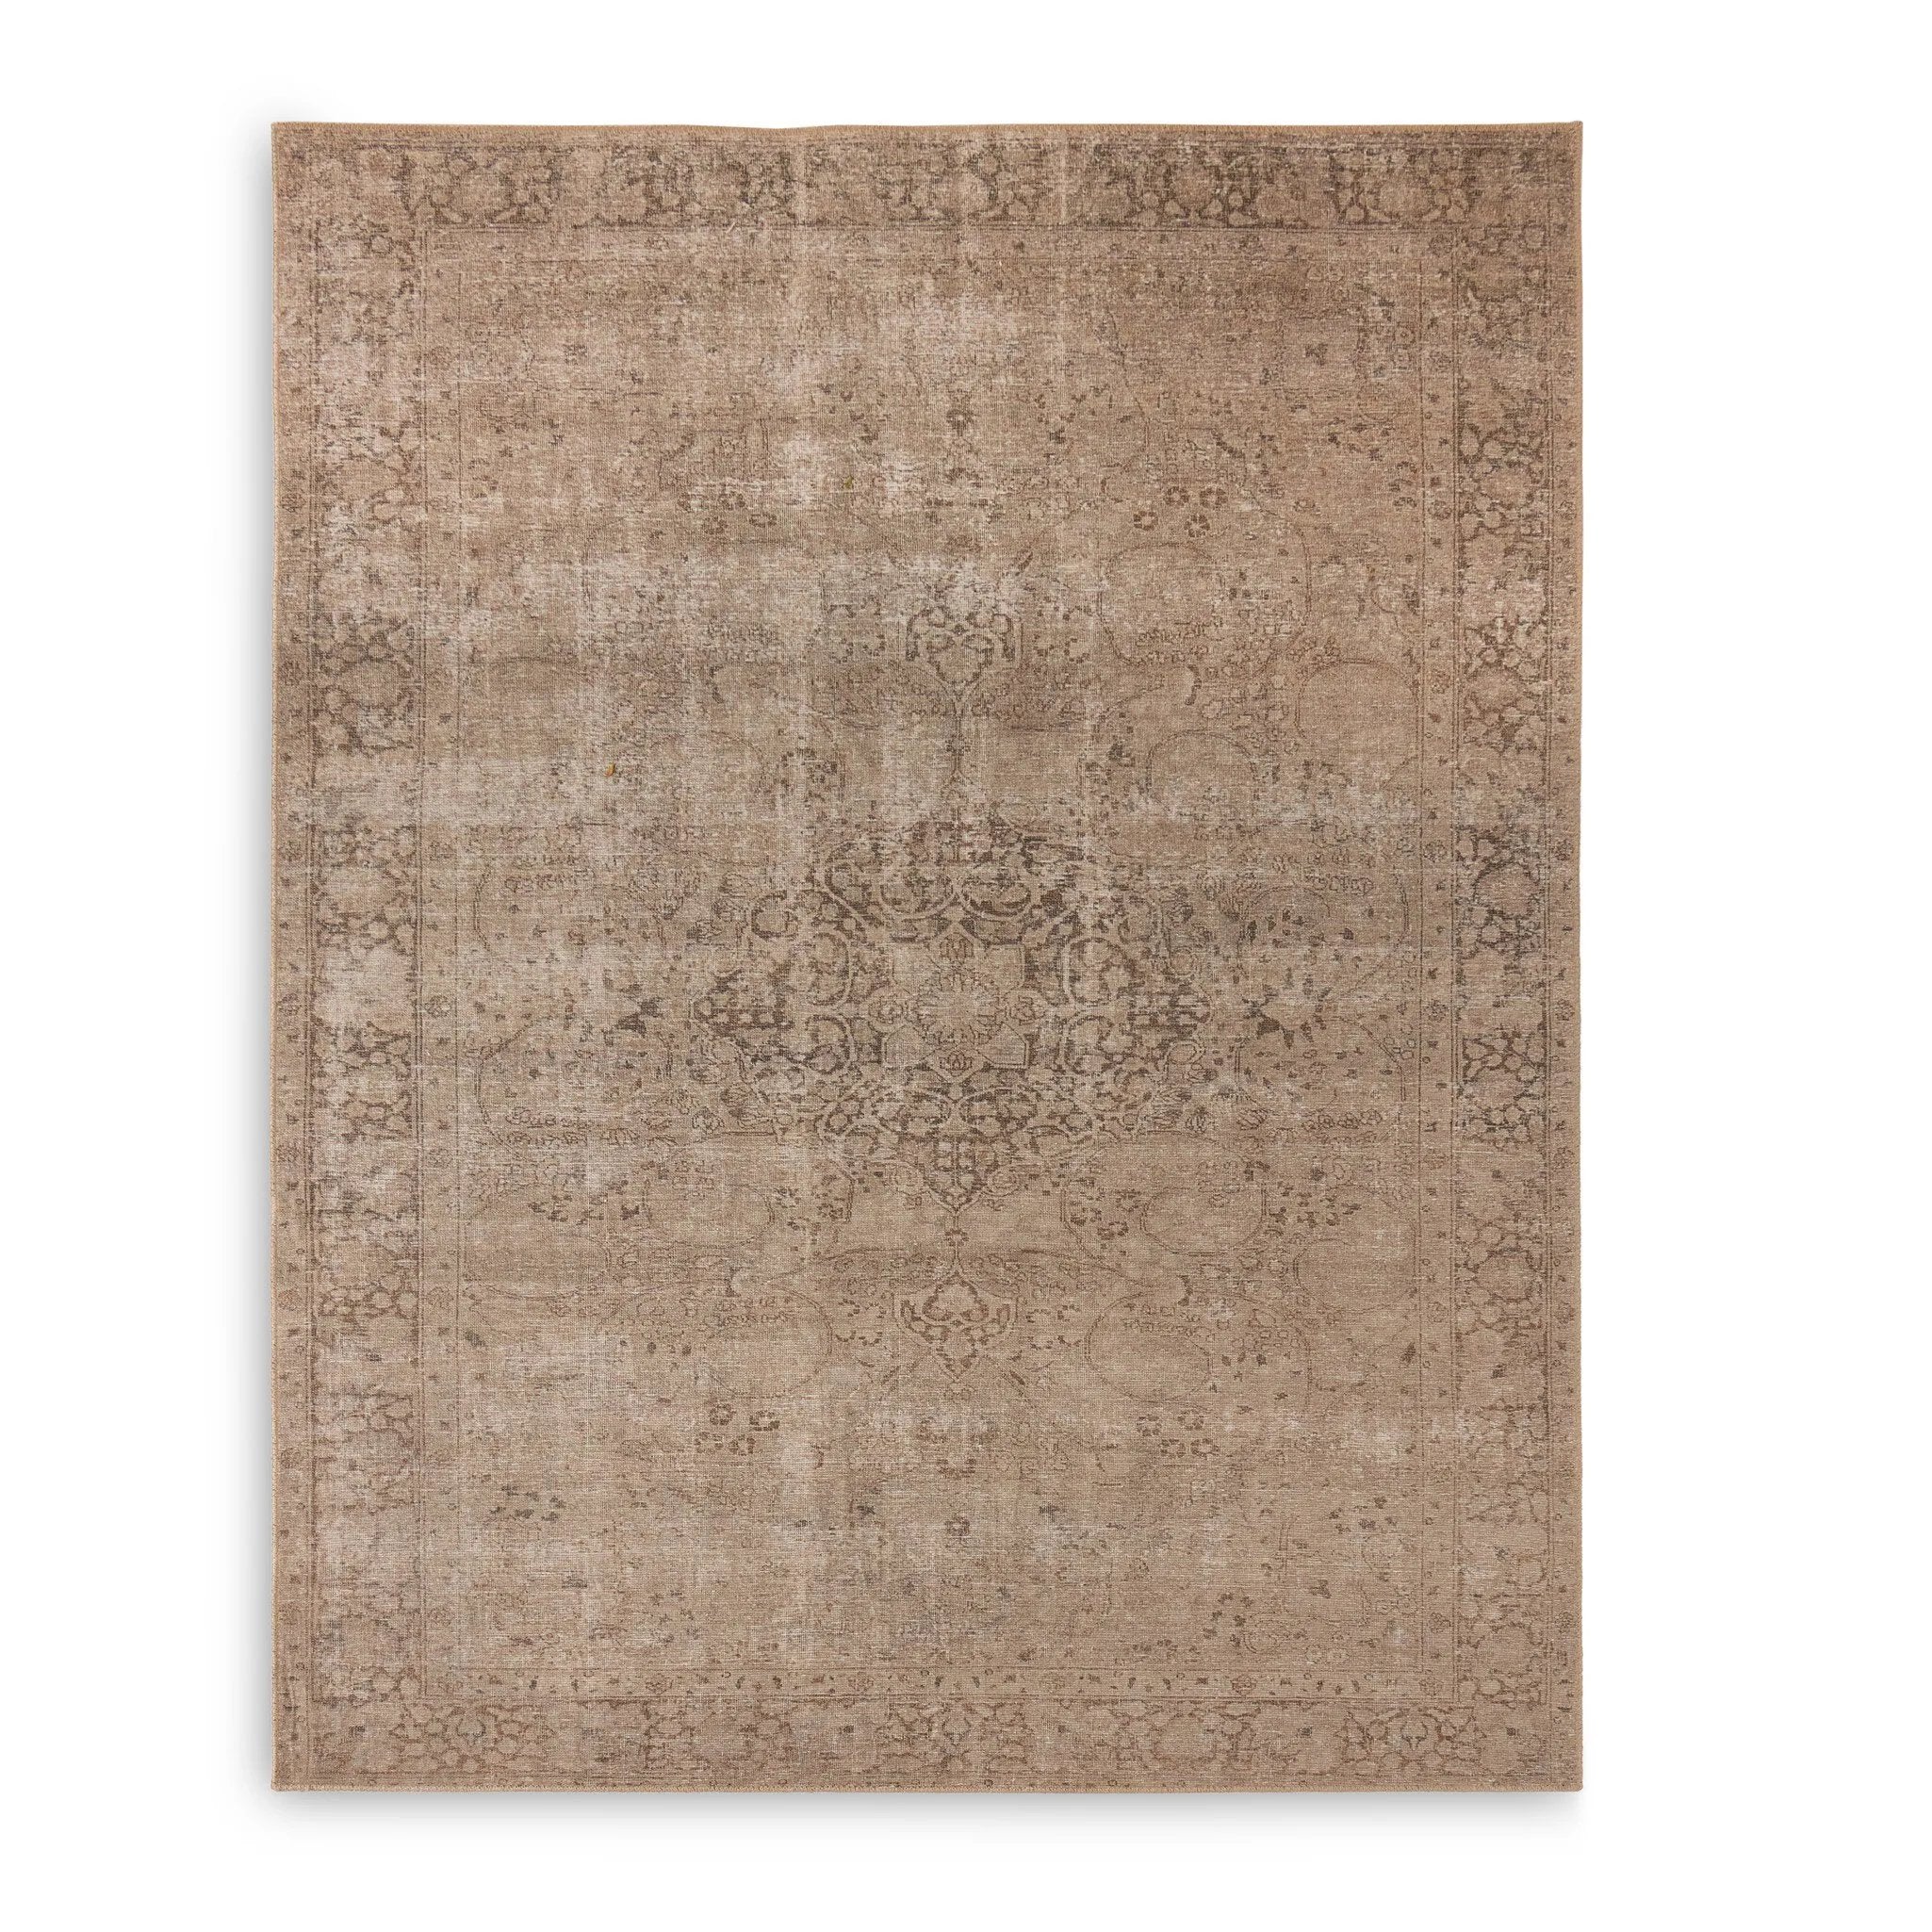 A jute-blend area rug is power-loomed in Egypt. Each pattern is created from a high-quality scan of a vintage rug. A team of graphic designers then perfects the pattern and colors to closely resemble the original rug. The result: a textural and versatile piece that looks authentically antiqued.Overall Dimensions60.00"w x 0.50"d x 96. Amethyst Home provides interior design, new home construction design consulting, vintage area rugs, and lighting in the Calabasas metro area.